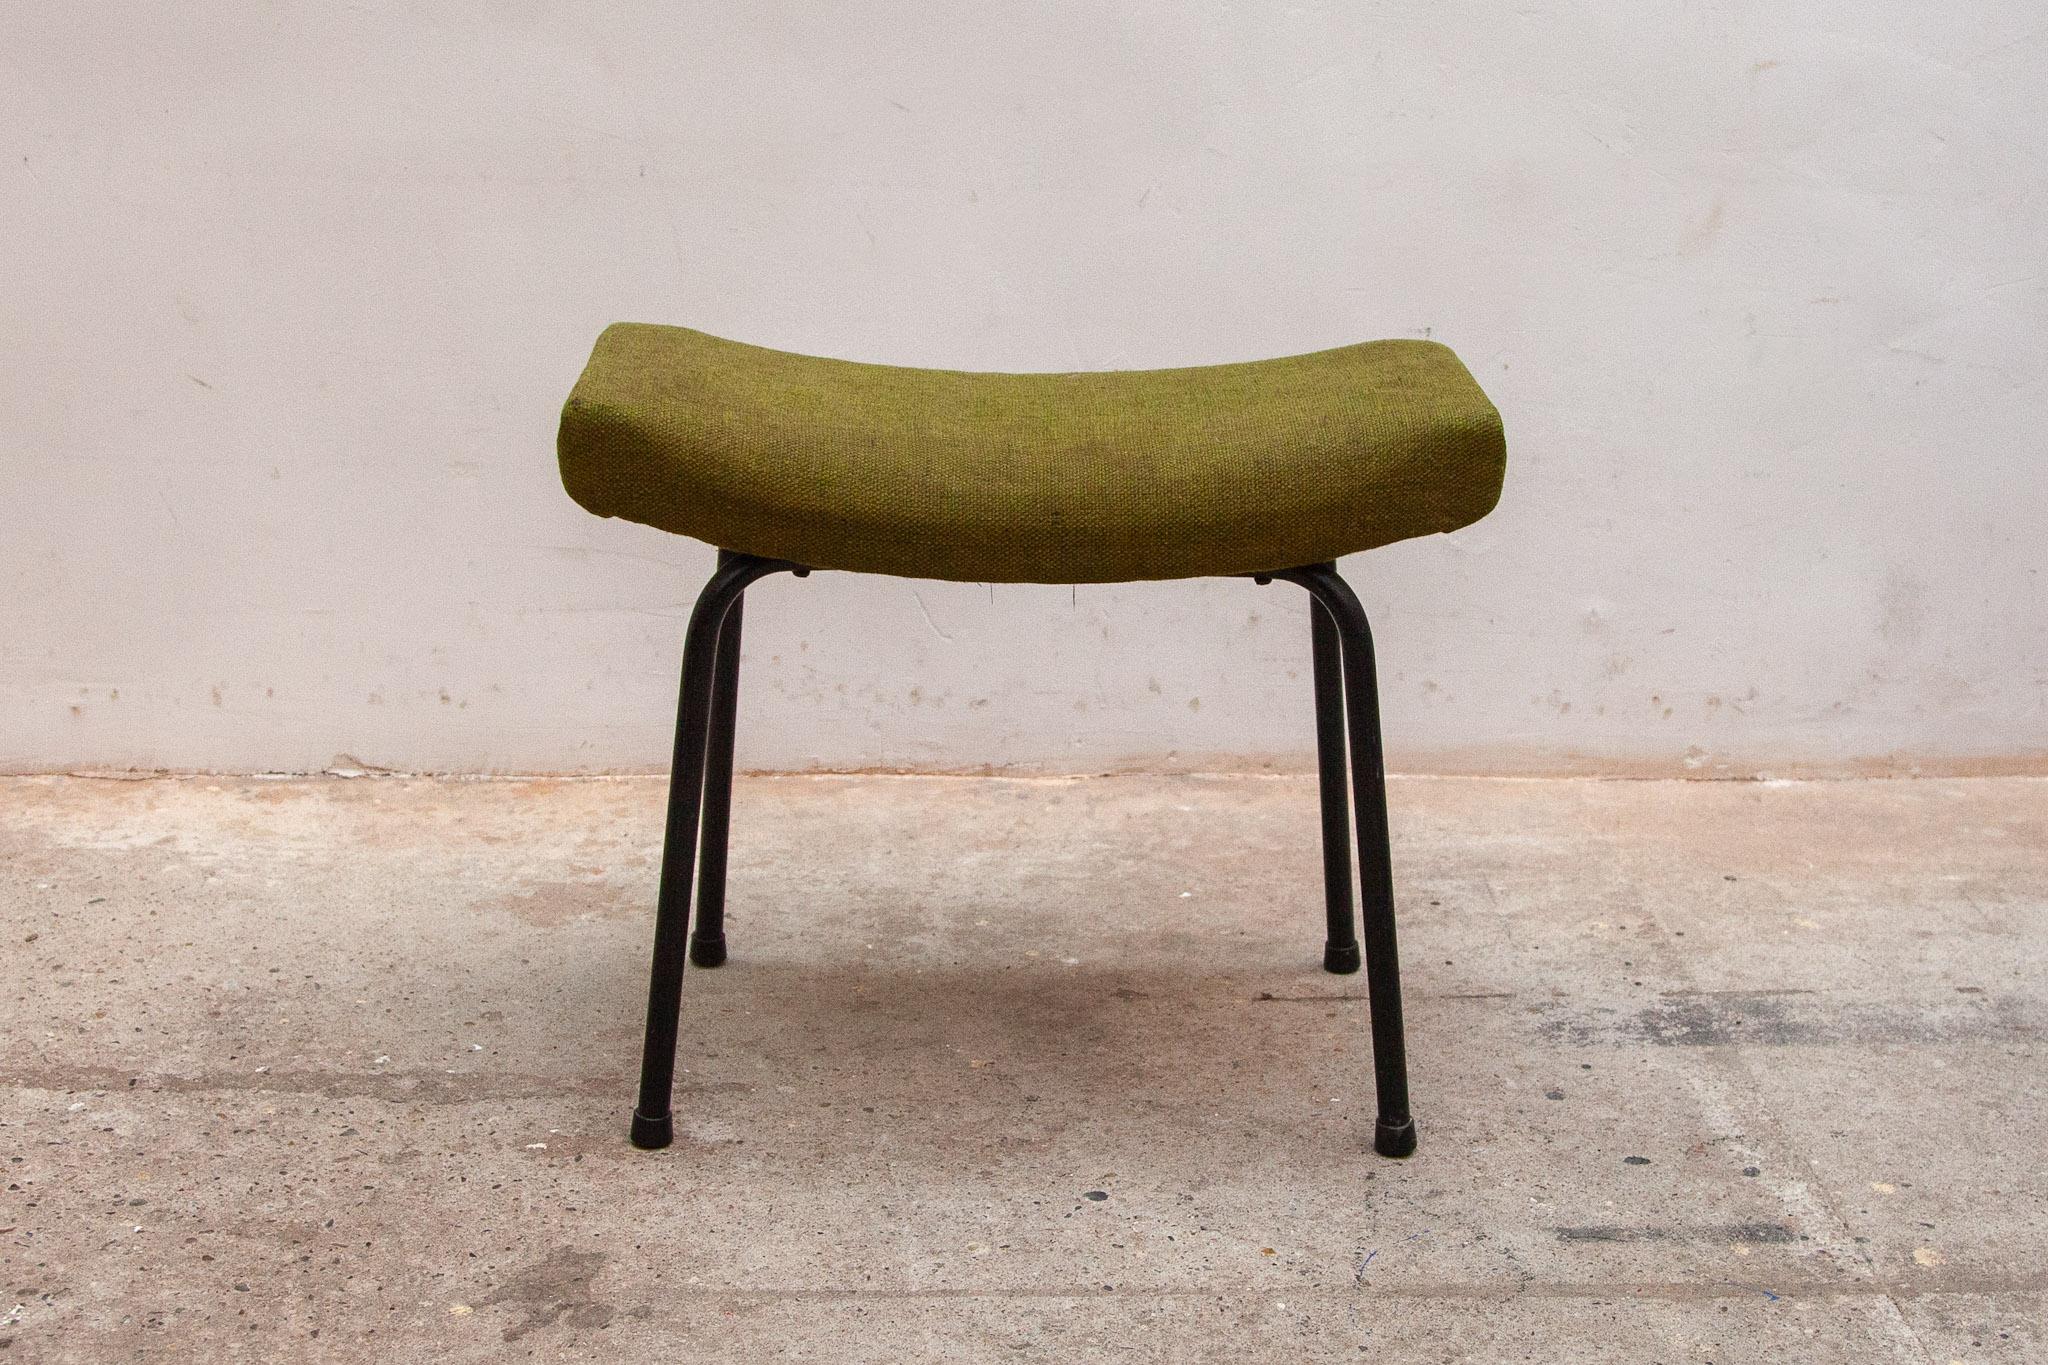 Stool with metal tube frame with original olive green upholstery designed by Pierre Guariche, 1950s, Belgium.

